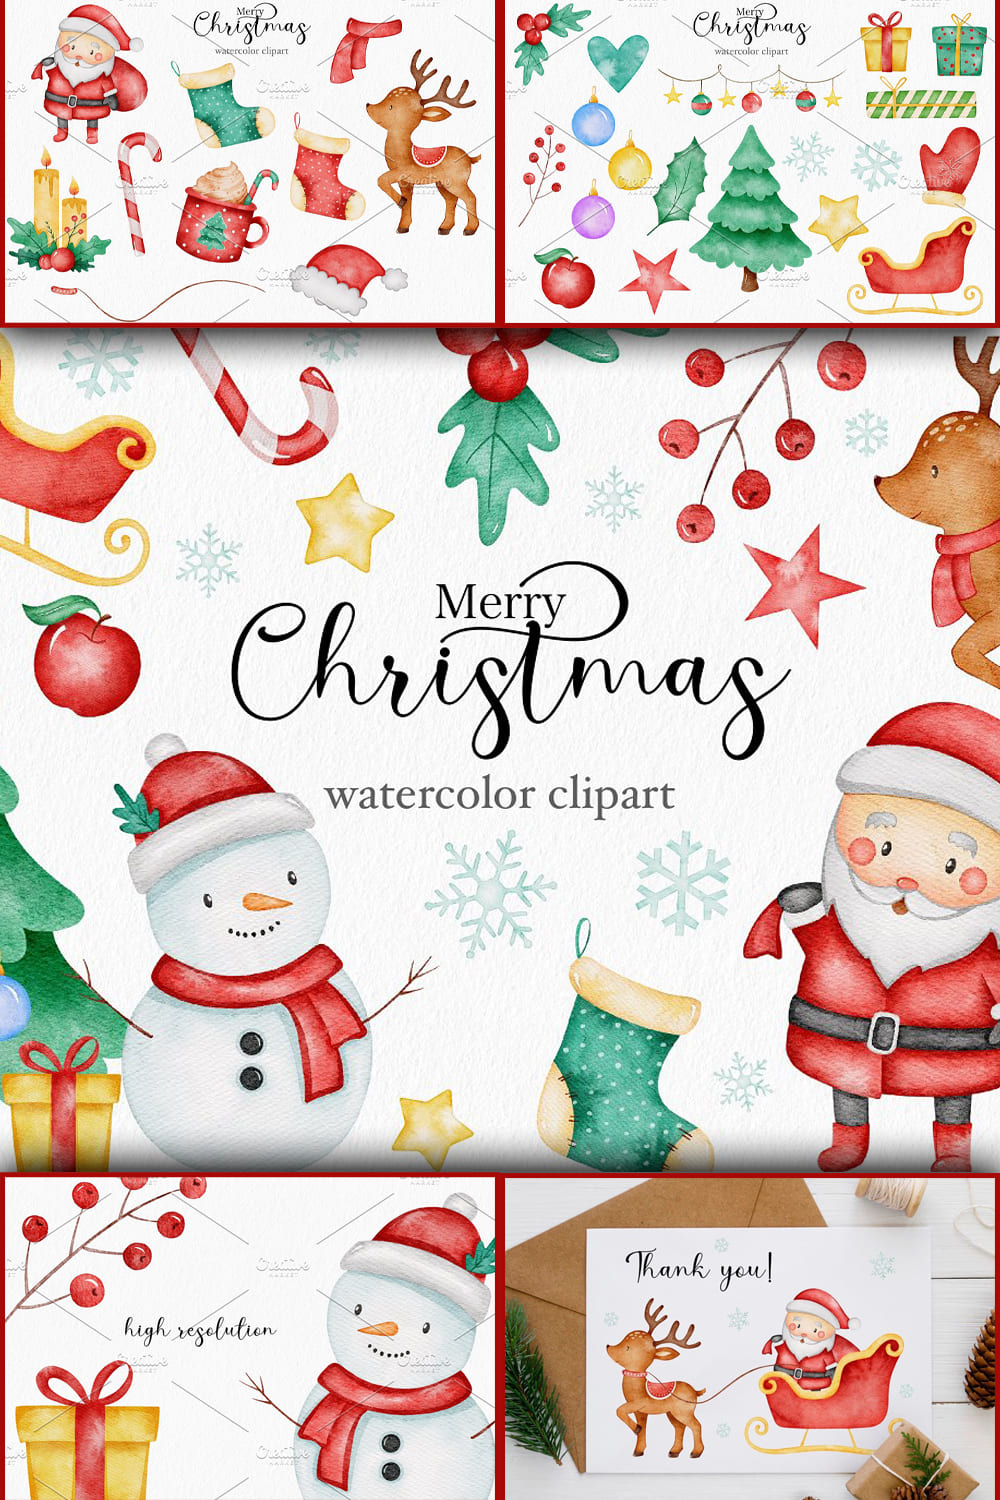 6729473 merry christmas watercolor clipart pinterest 1000 1500 131